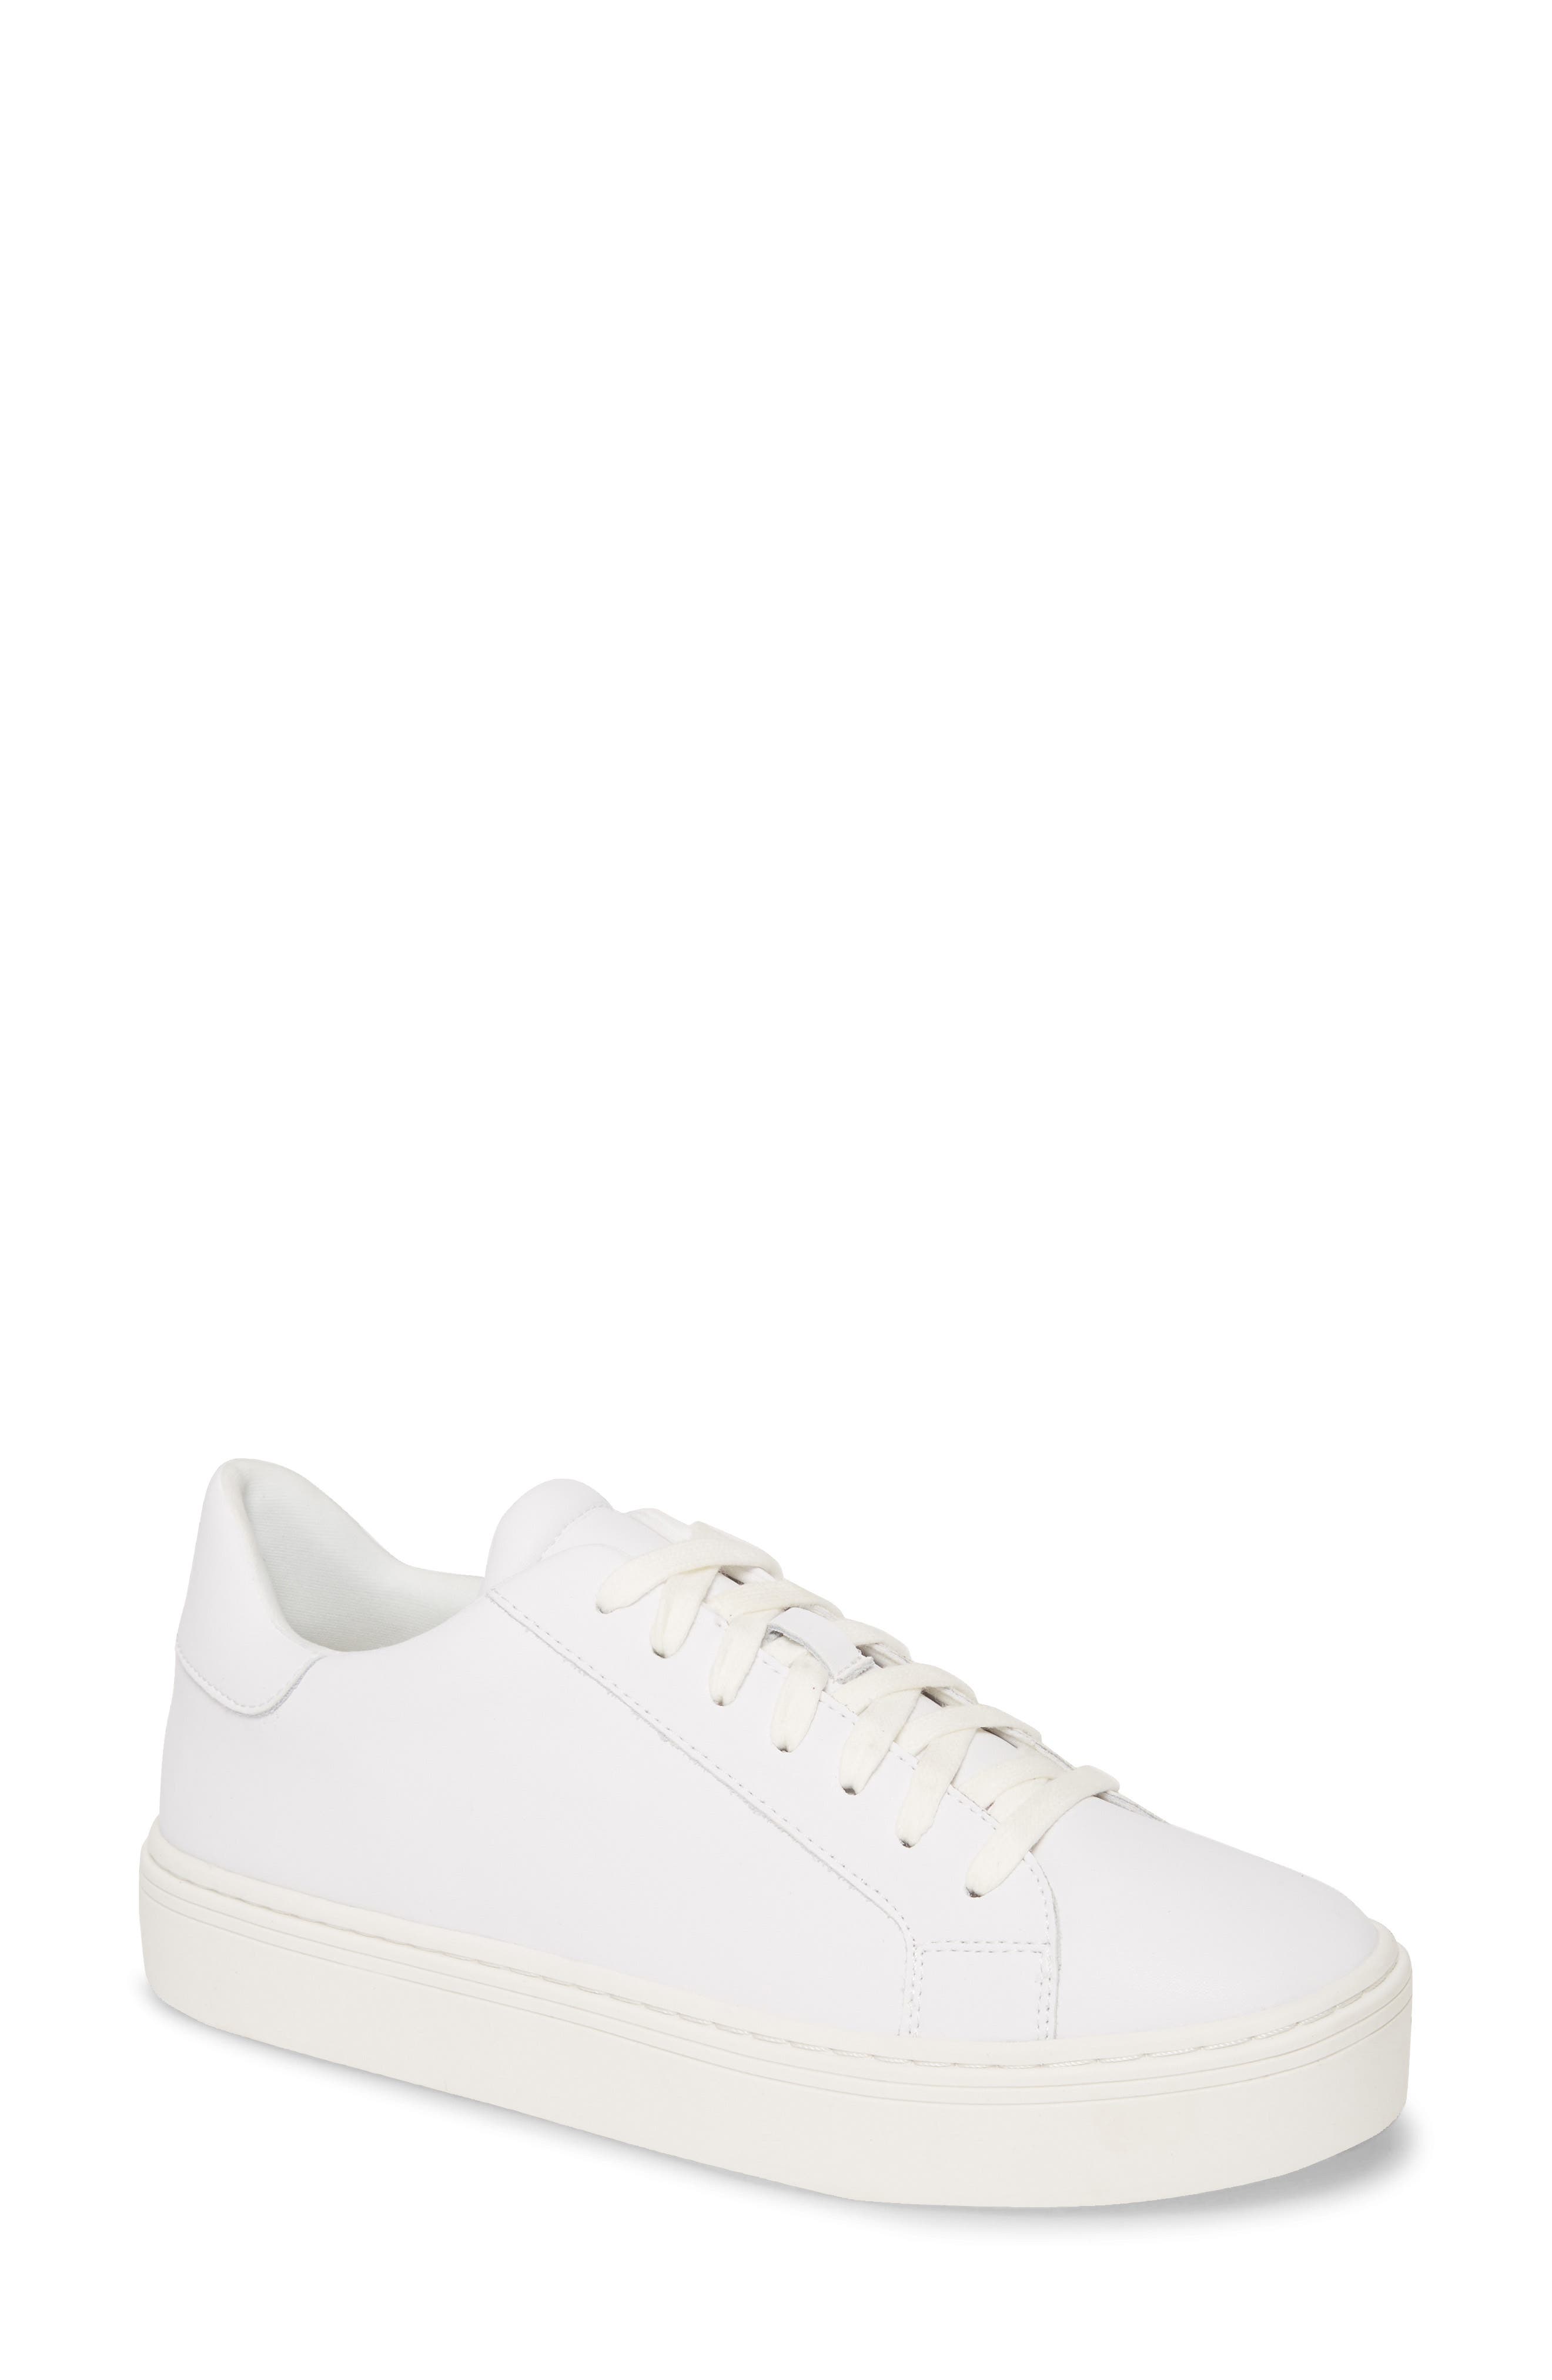 white sneakers for women leather